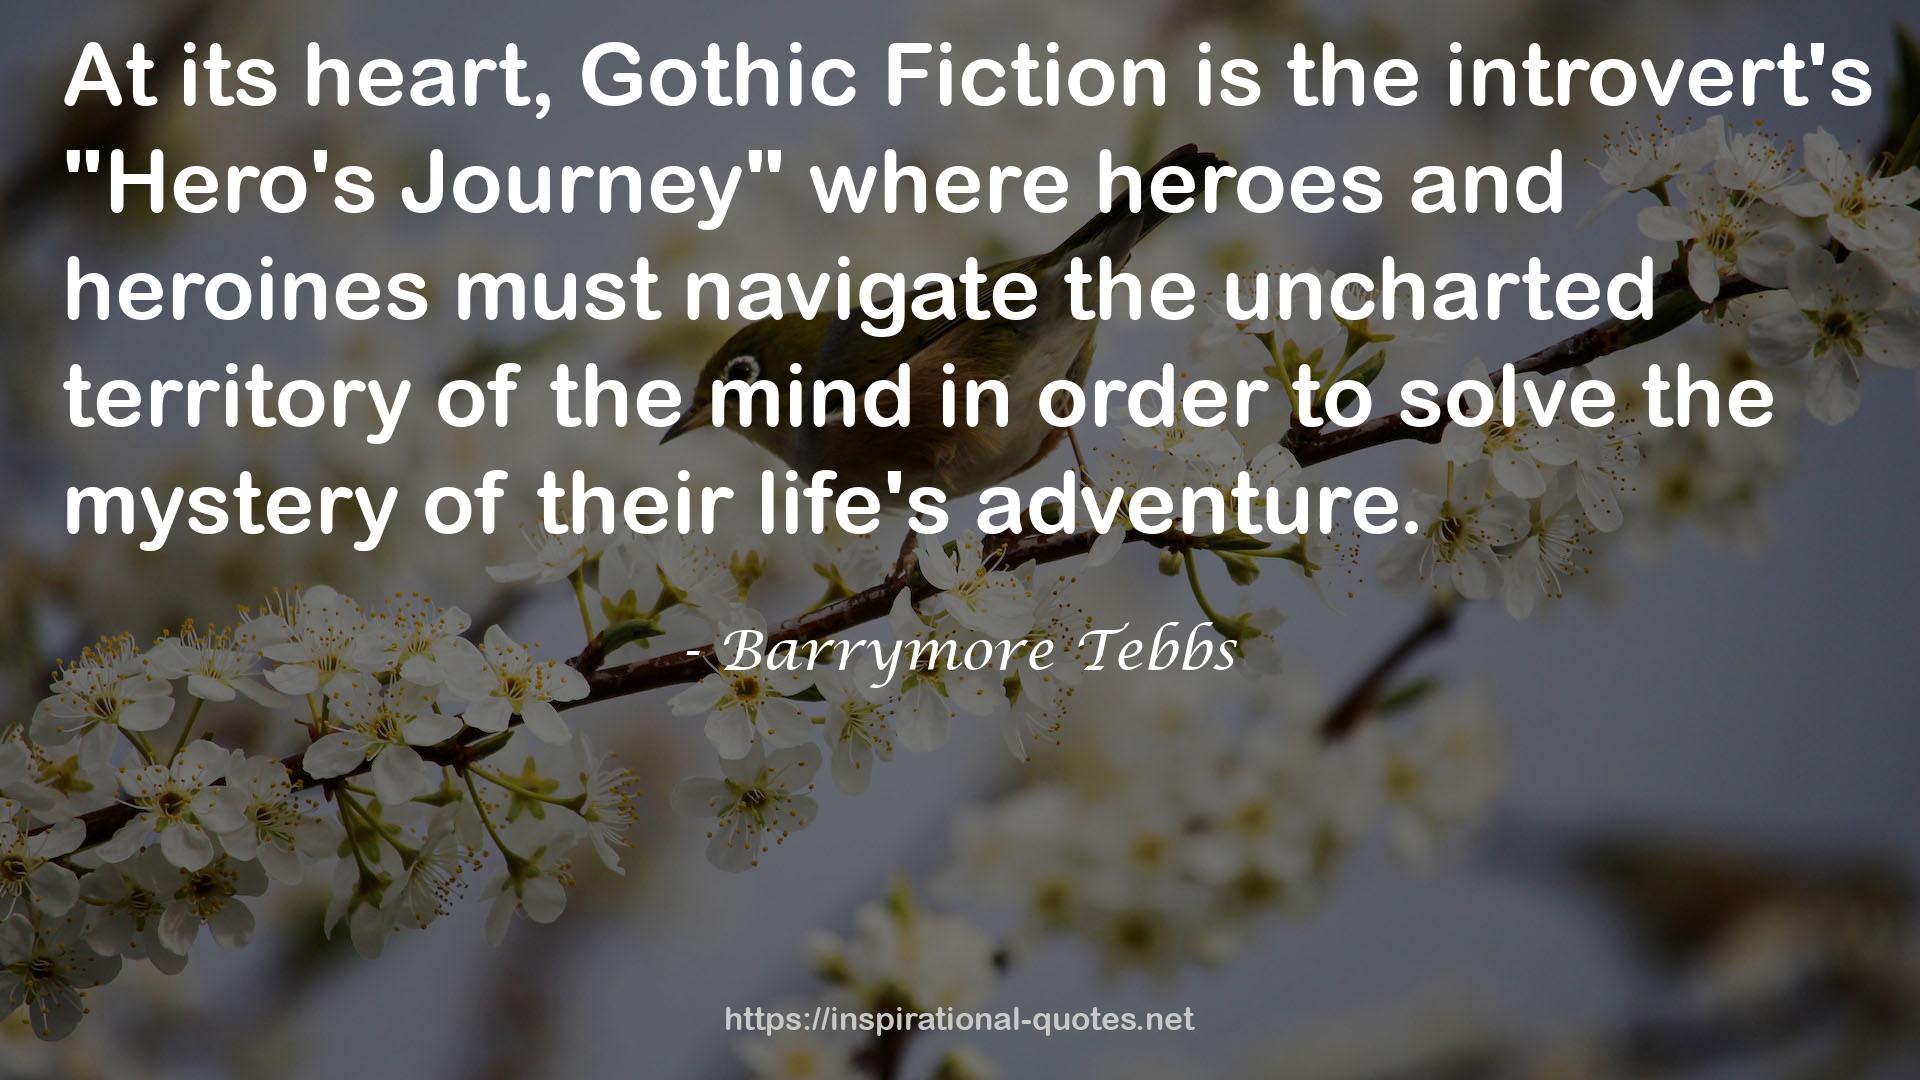 Barrymore Tebbs QUOTES